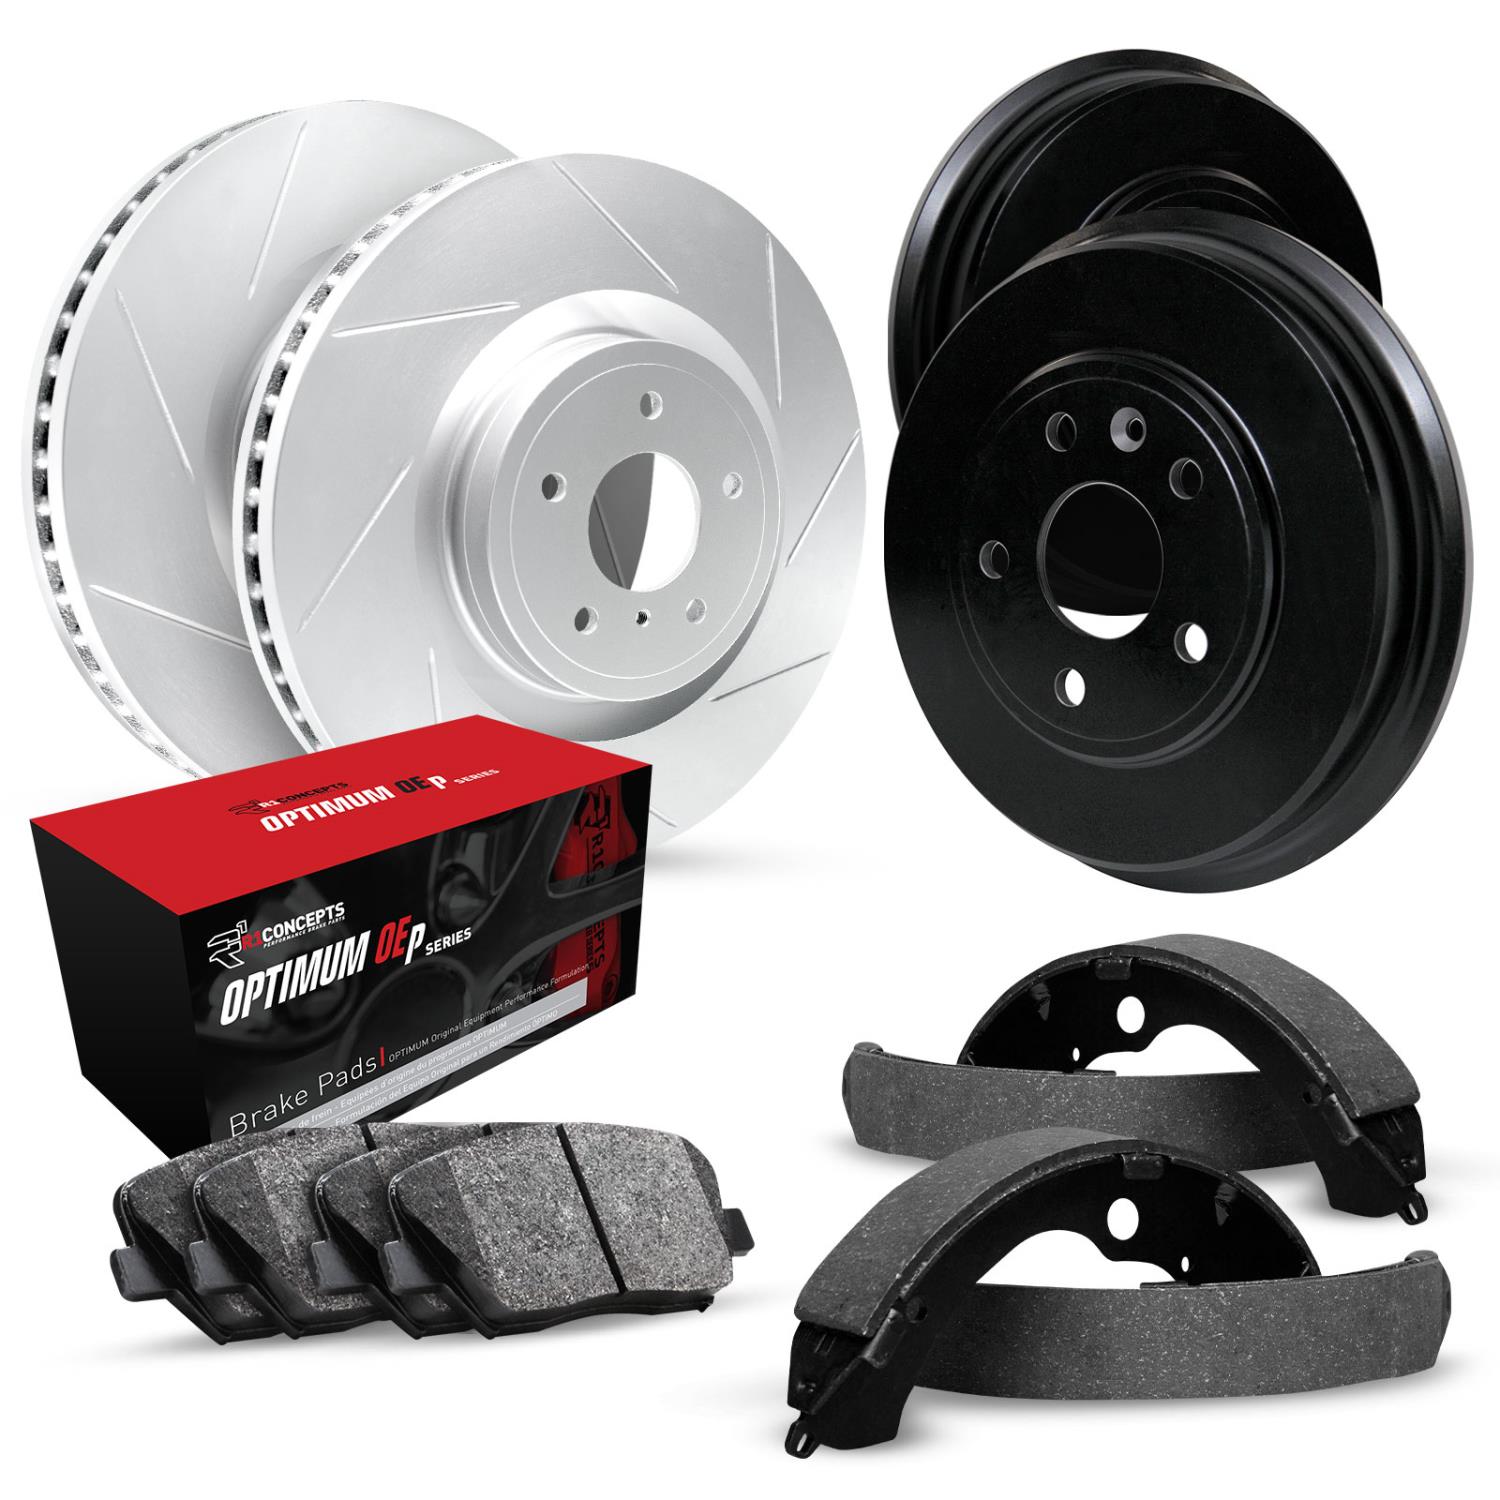 GEO-Carbon Slotted Brake Rotor & Drum Set w/Optimum OE Pads & Shoes, 1971-1972 GM, Position: Front & Rear